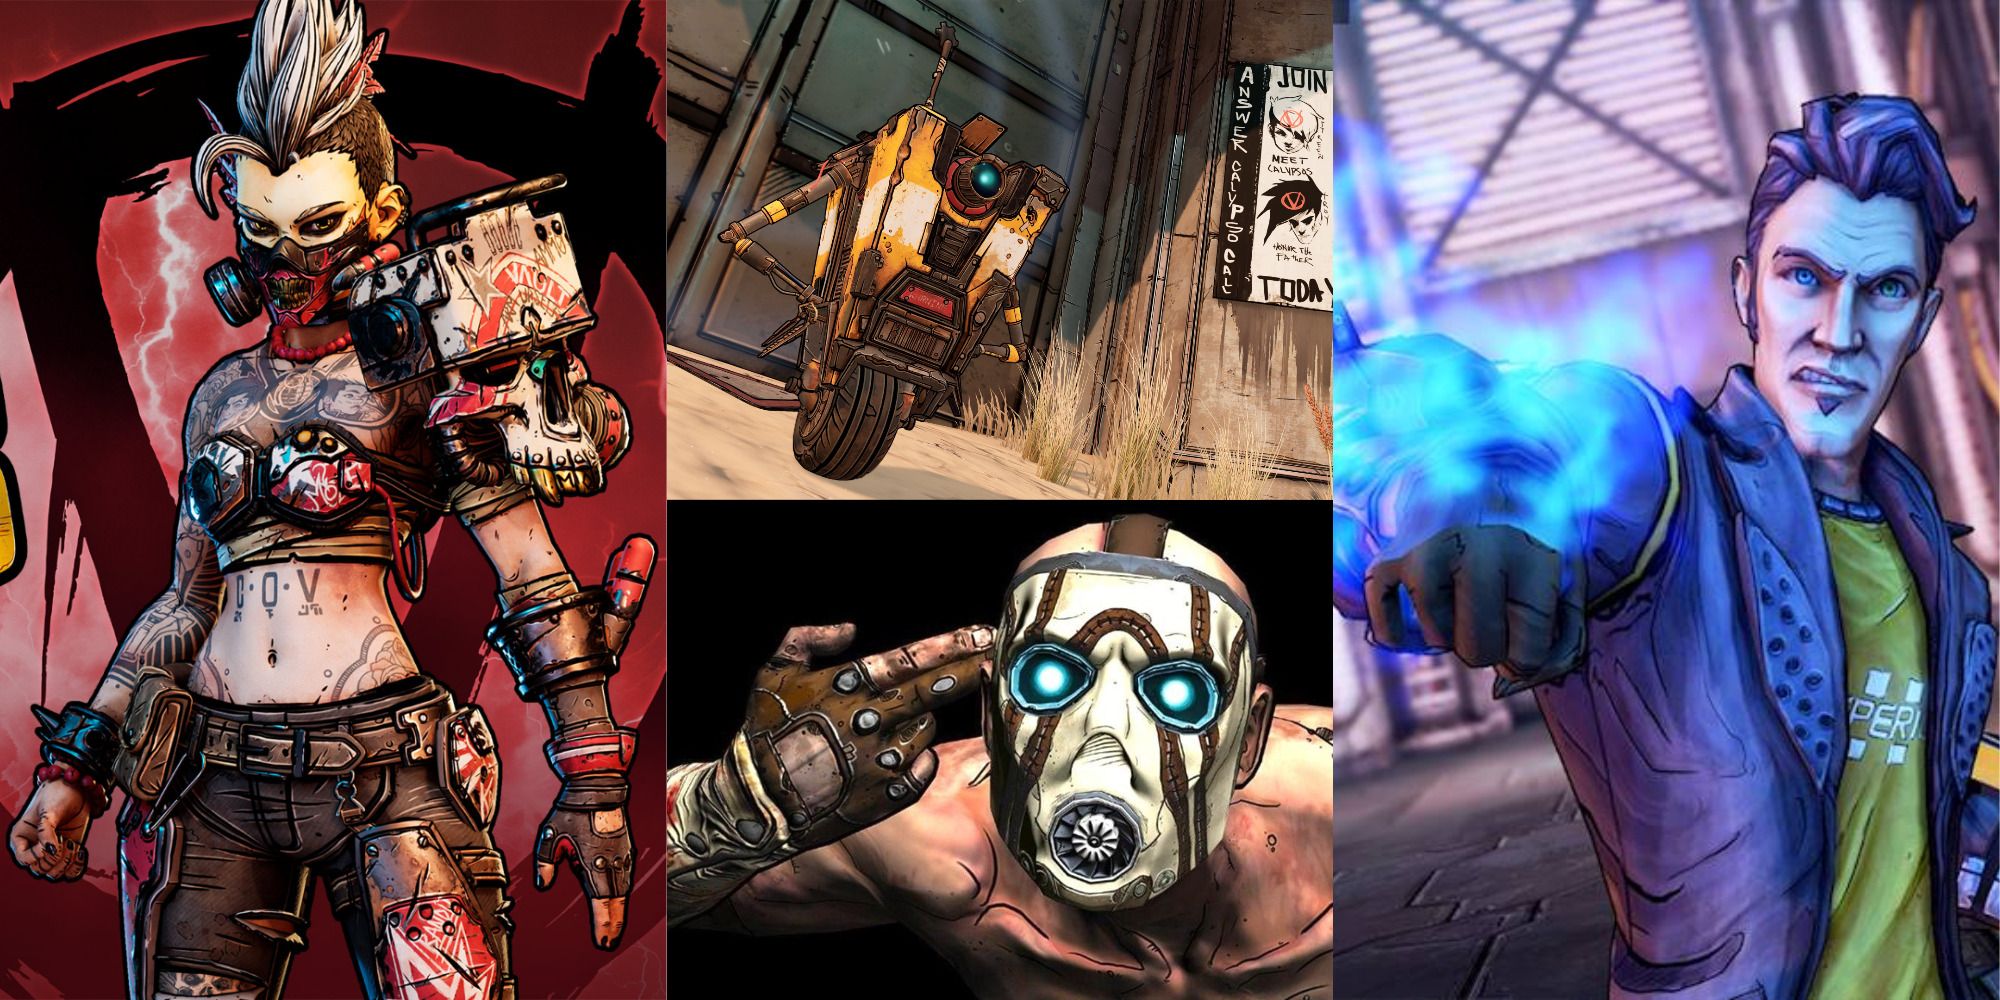 Showcase of Moze, Claptrap, Psycho, and Handsome Jack from the Borderlands Franchise